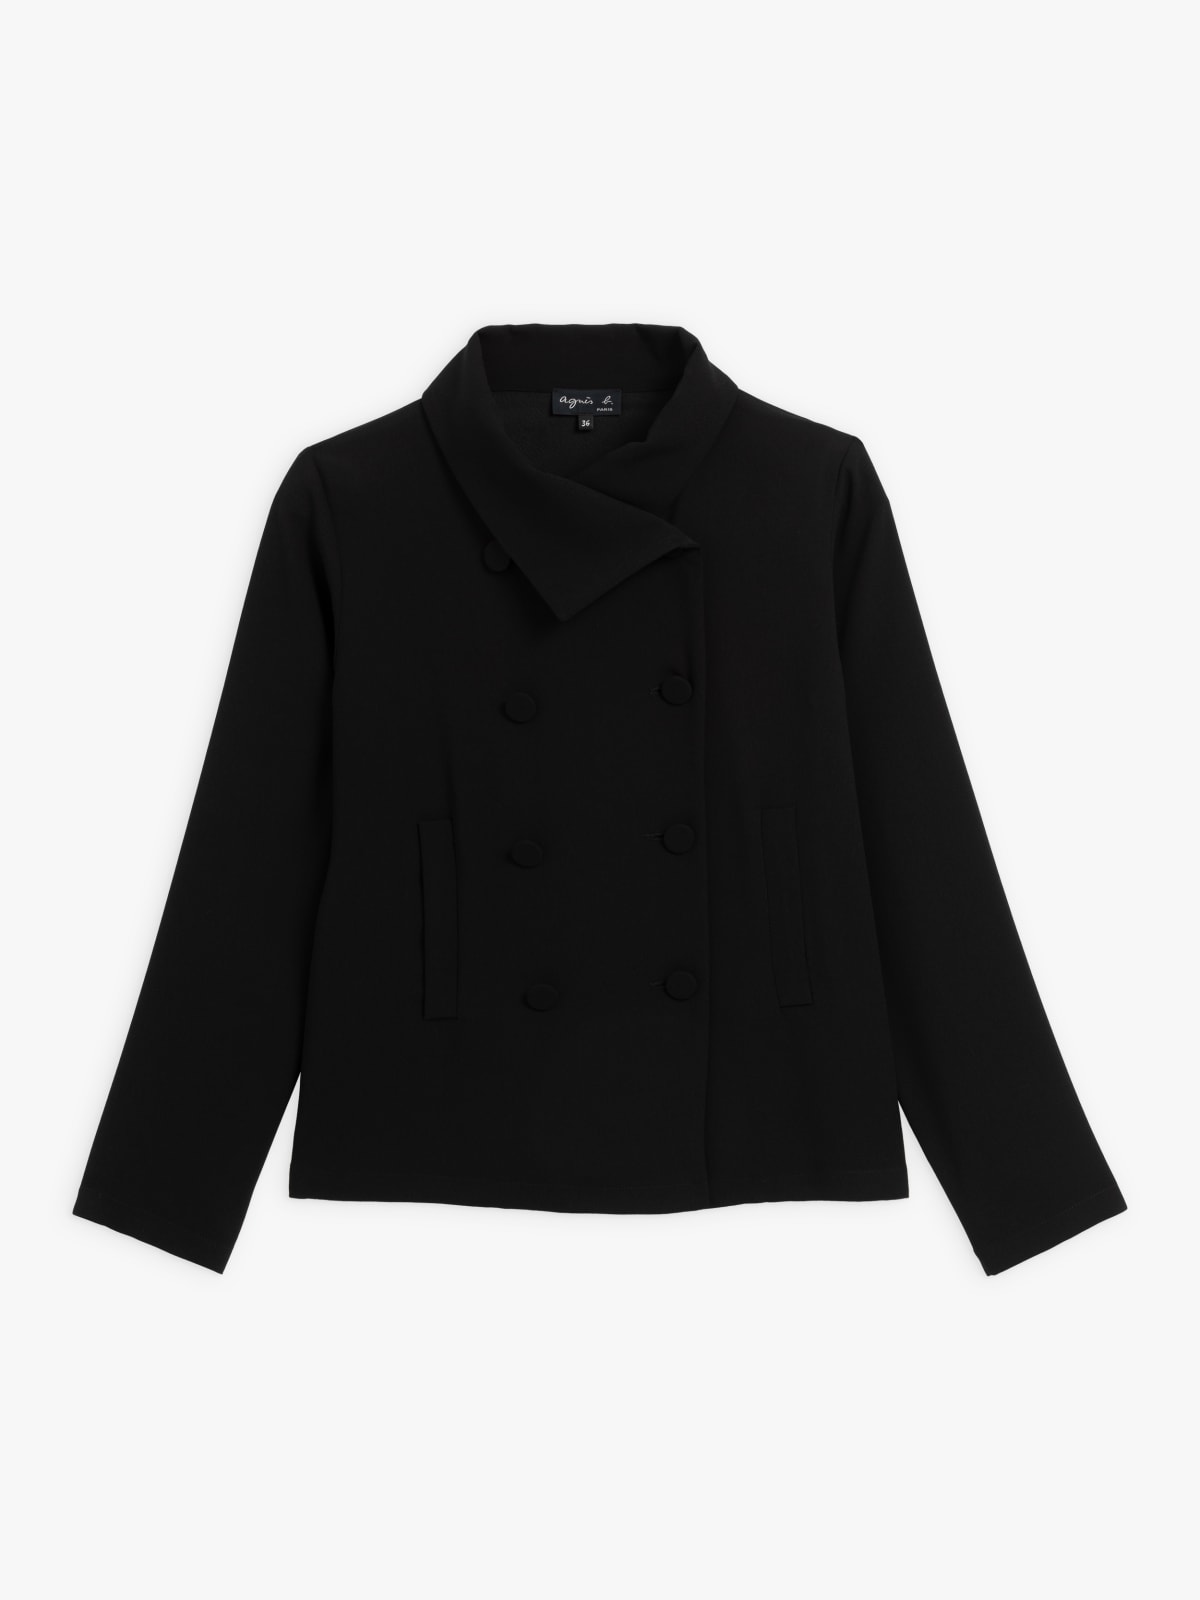 black unlined asymmetric double-breasted button closure jacket